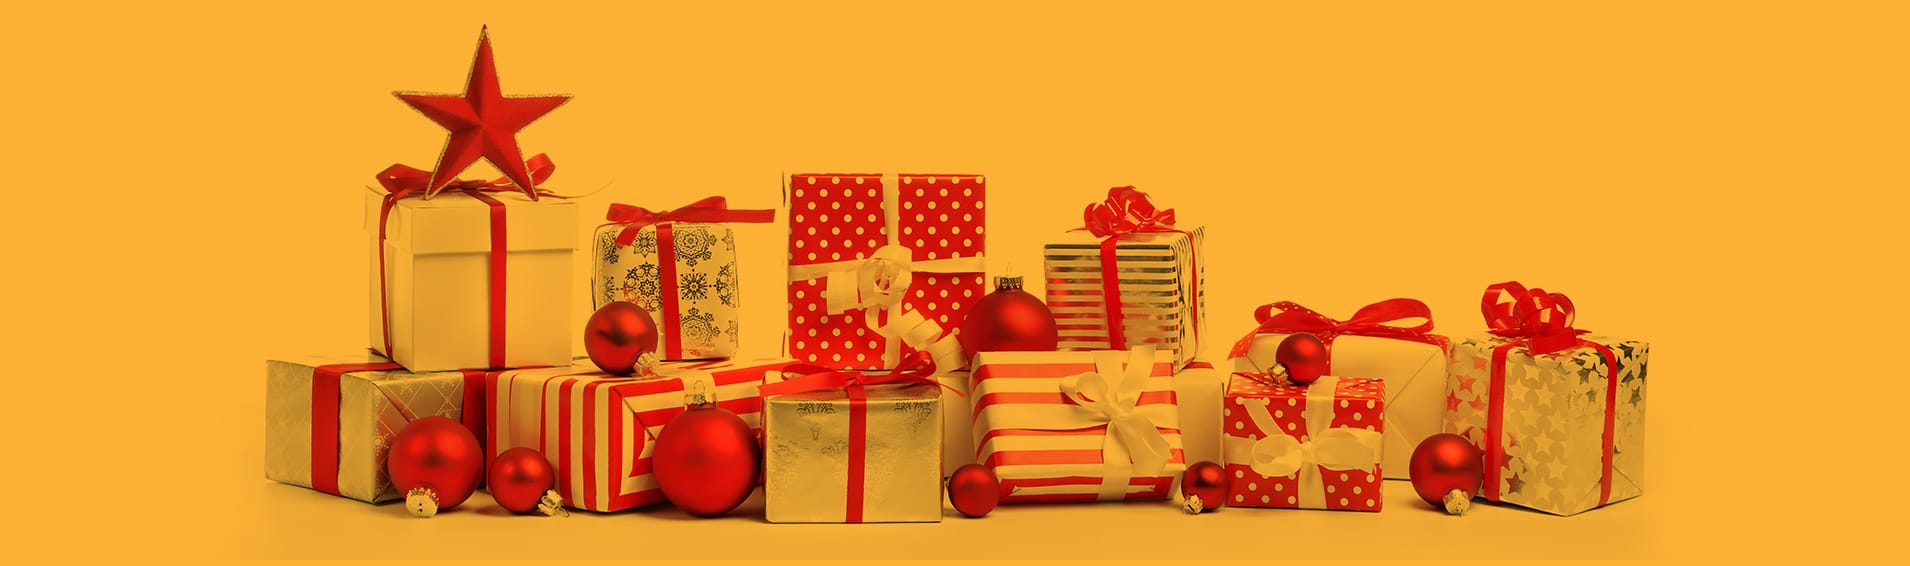 What Product Categories will make the Christmas event special for your customers?